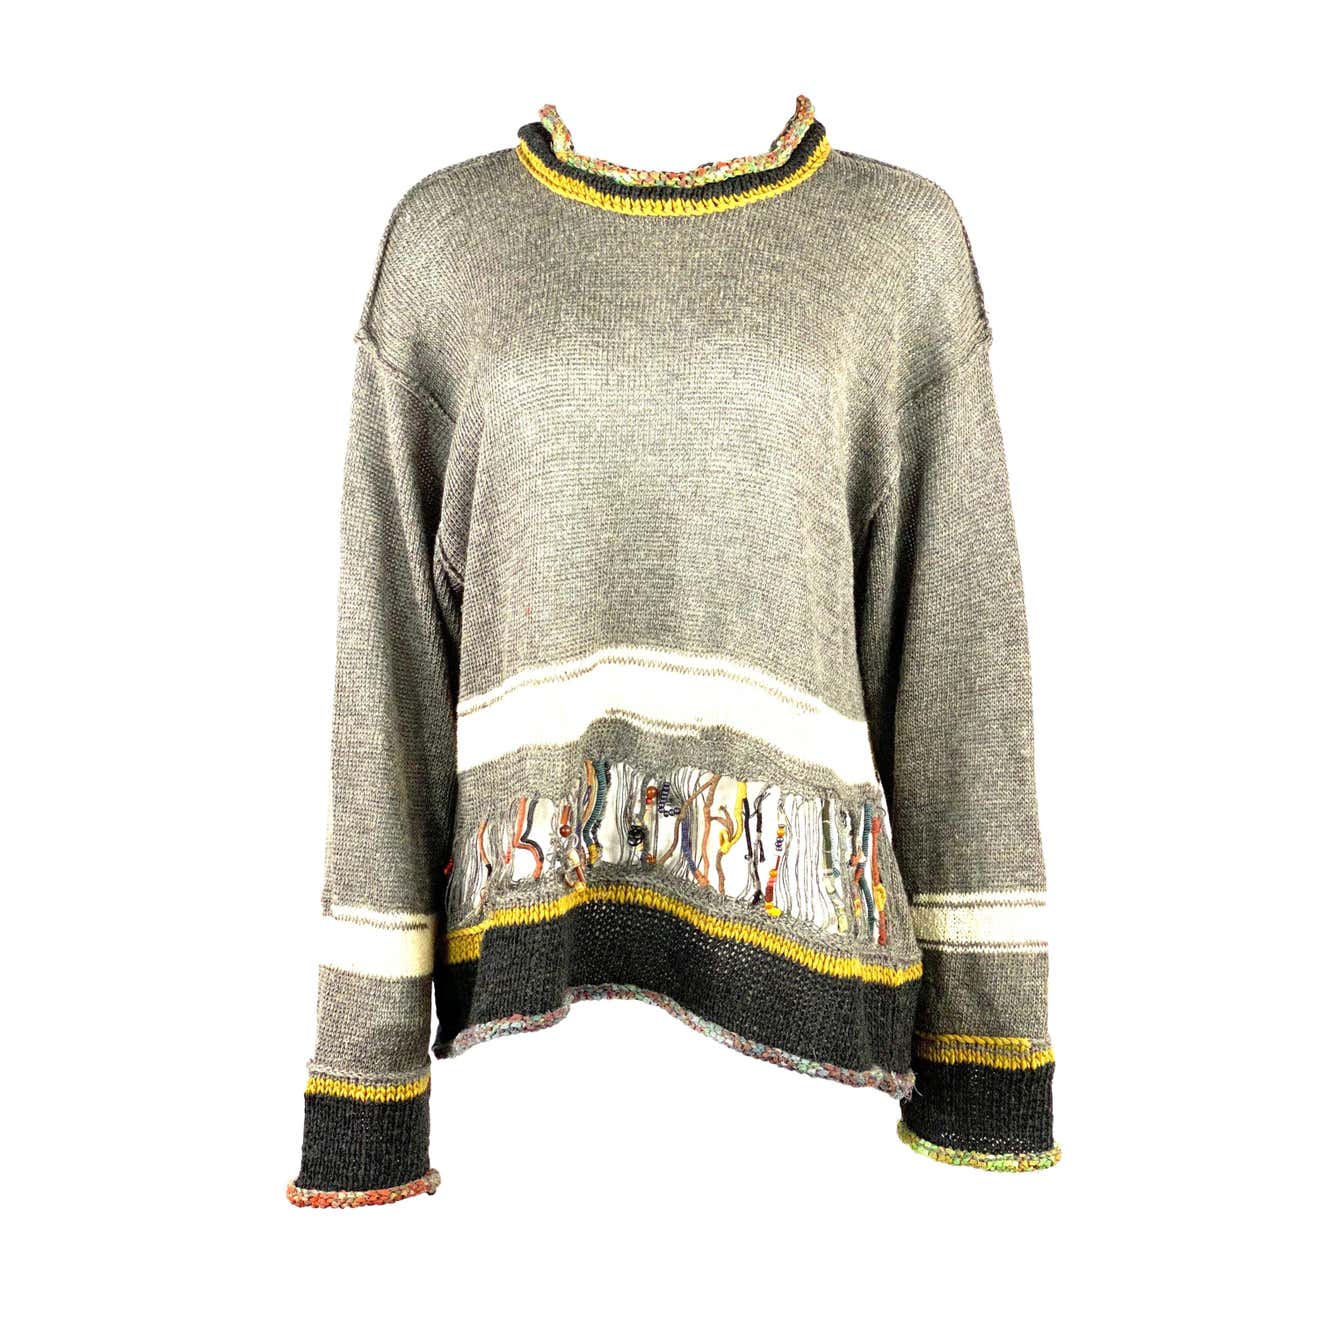 Matsuda Nicole Tokyo Japan Grey Knit Pullover Sweater w/ Beads For Sale ...